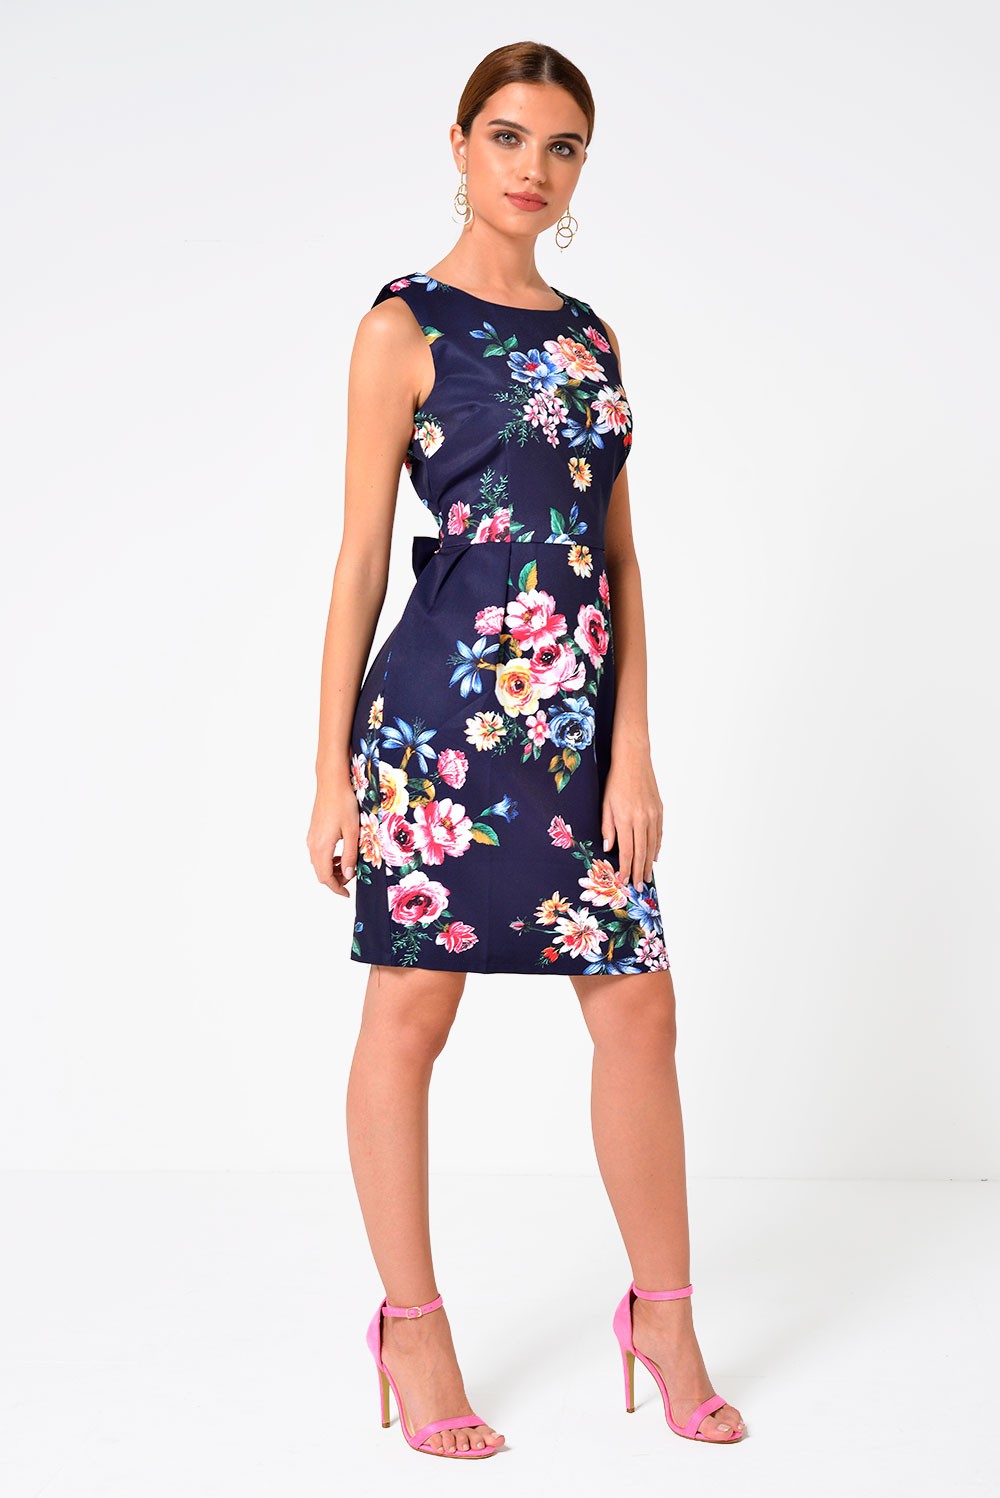 Marc Angelo Ava Floral Print Dress in Navy | iCLOTHING